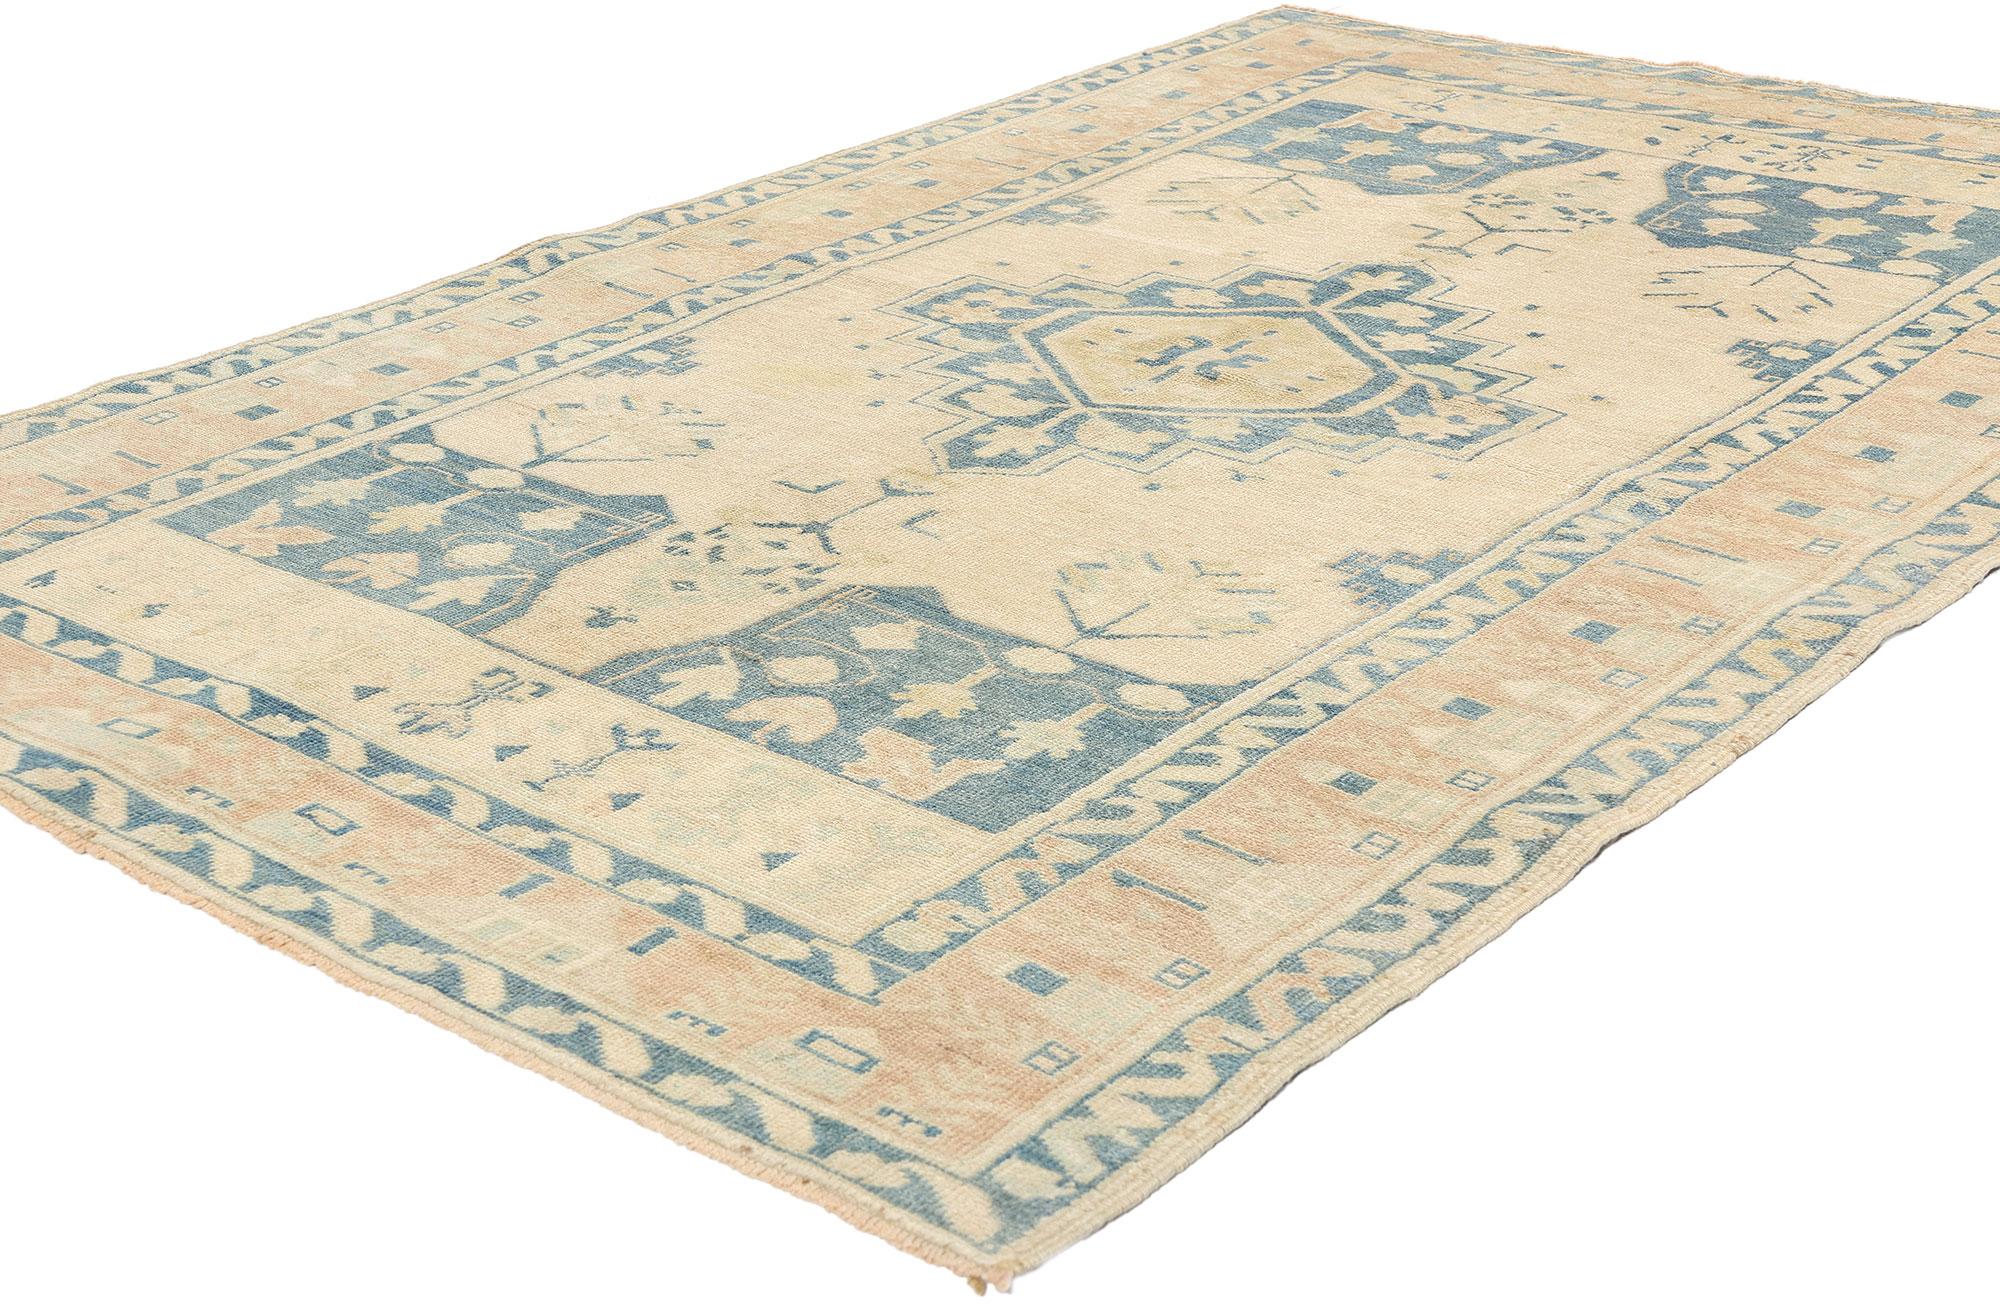 52956 Vintage Muted Turkish Oushak Rug, 04'04 x 06'10. Turkish Oushak rugs, washed with antique charm and adorned with subdued colors, undergo a meticulous washing process that preserves their texture and pile integrity. This delicate treatment